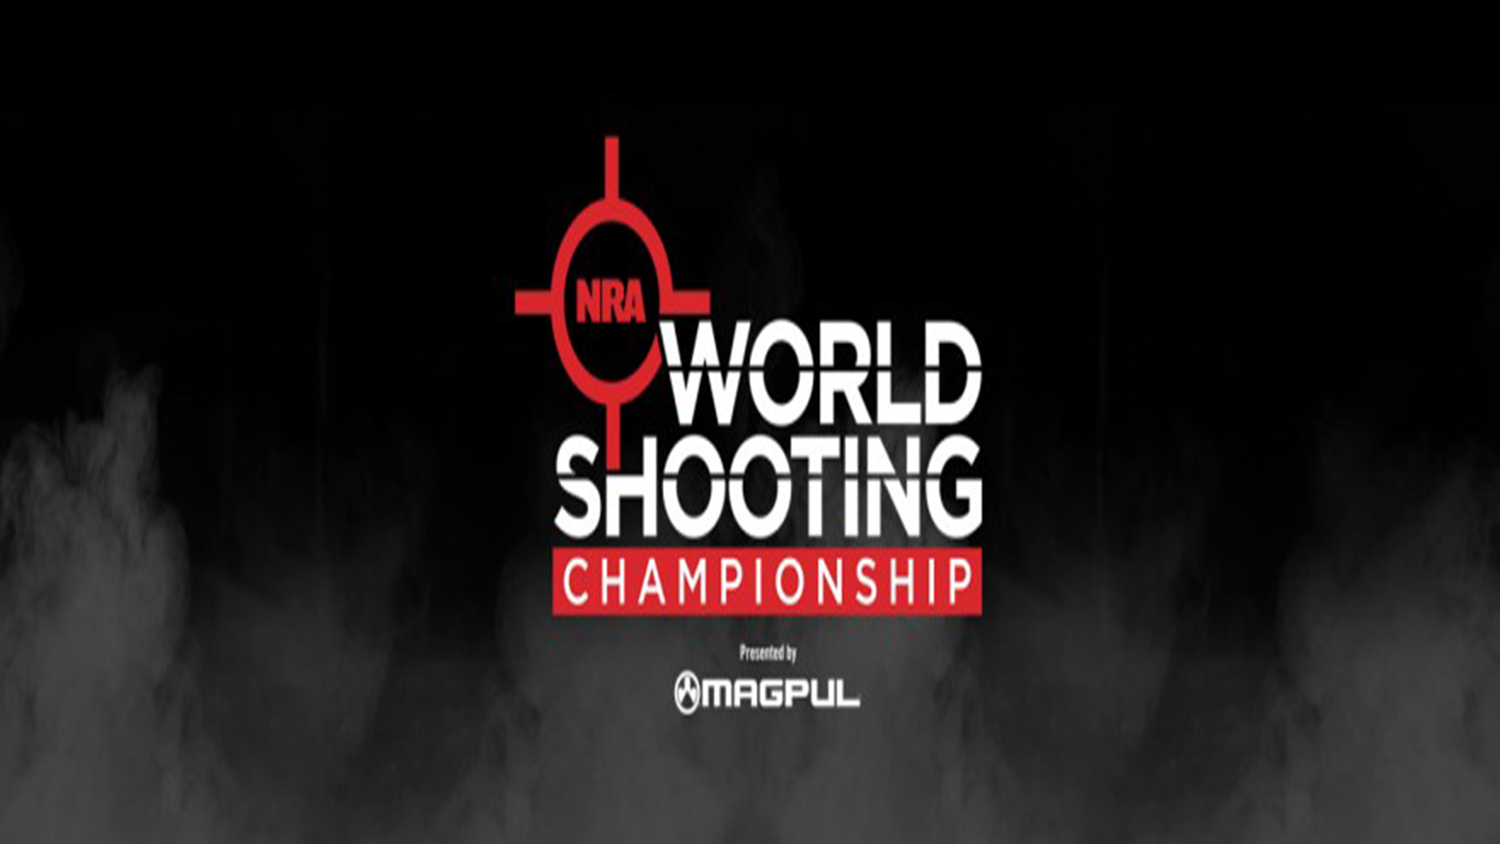 The NRA Looks to Crown the World's Best Shooter